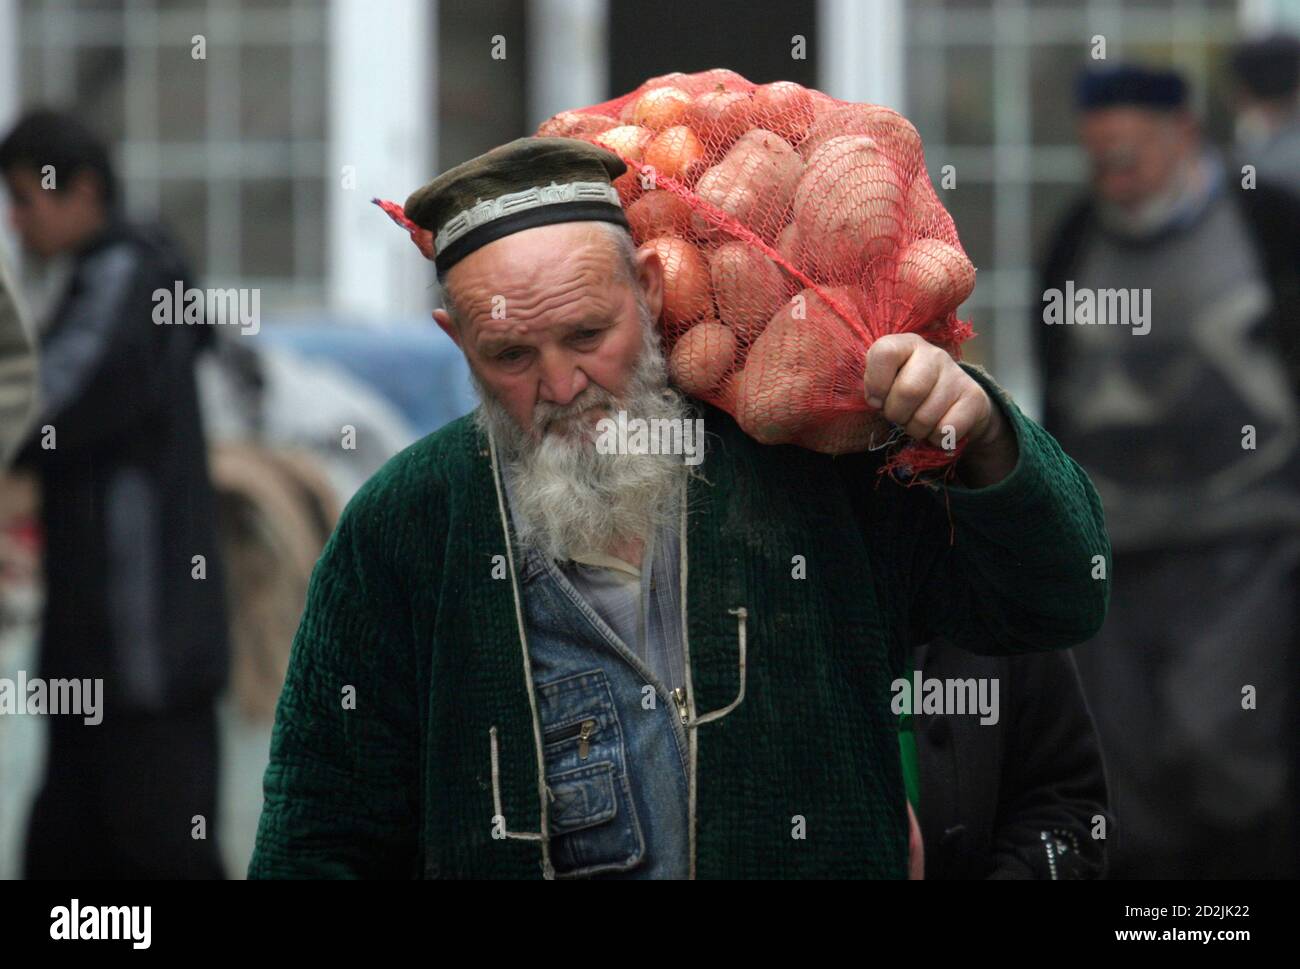 A man carries a sack of potatoes at a market in Dushanbe February 23, 2009.  Picture taken February 23, 2009. Plagued by poverty, rampant crime and now  collapsing incomes, Tajikistan risks turning